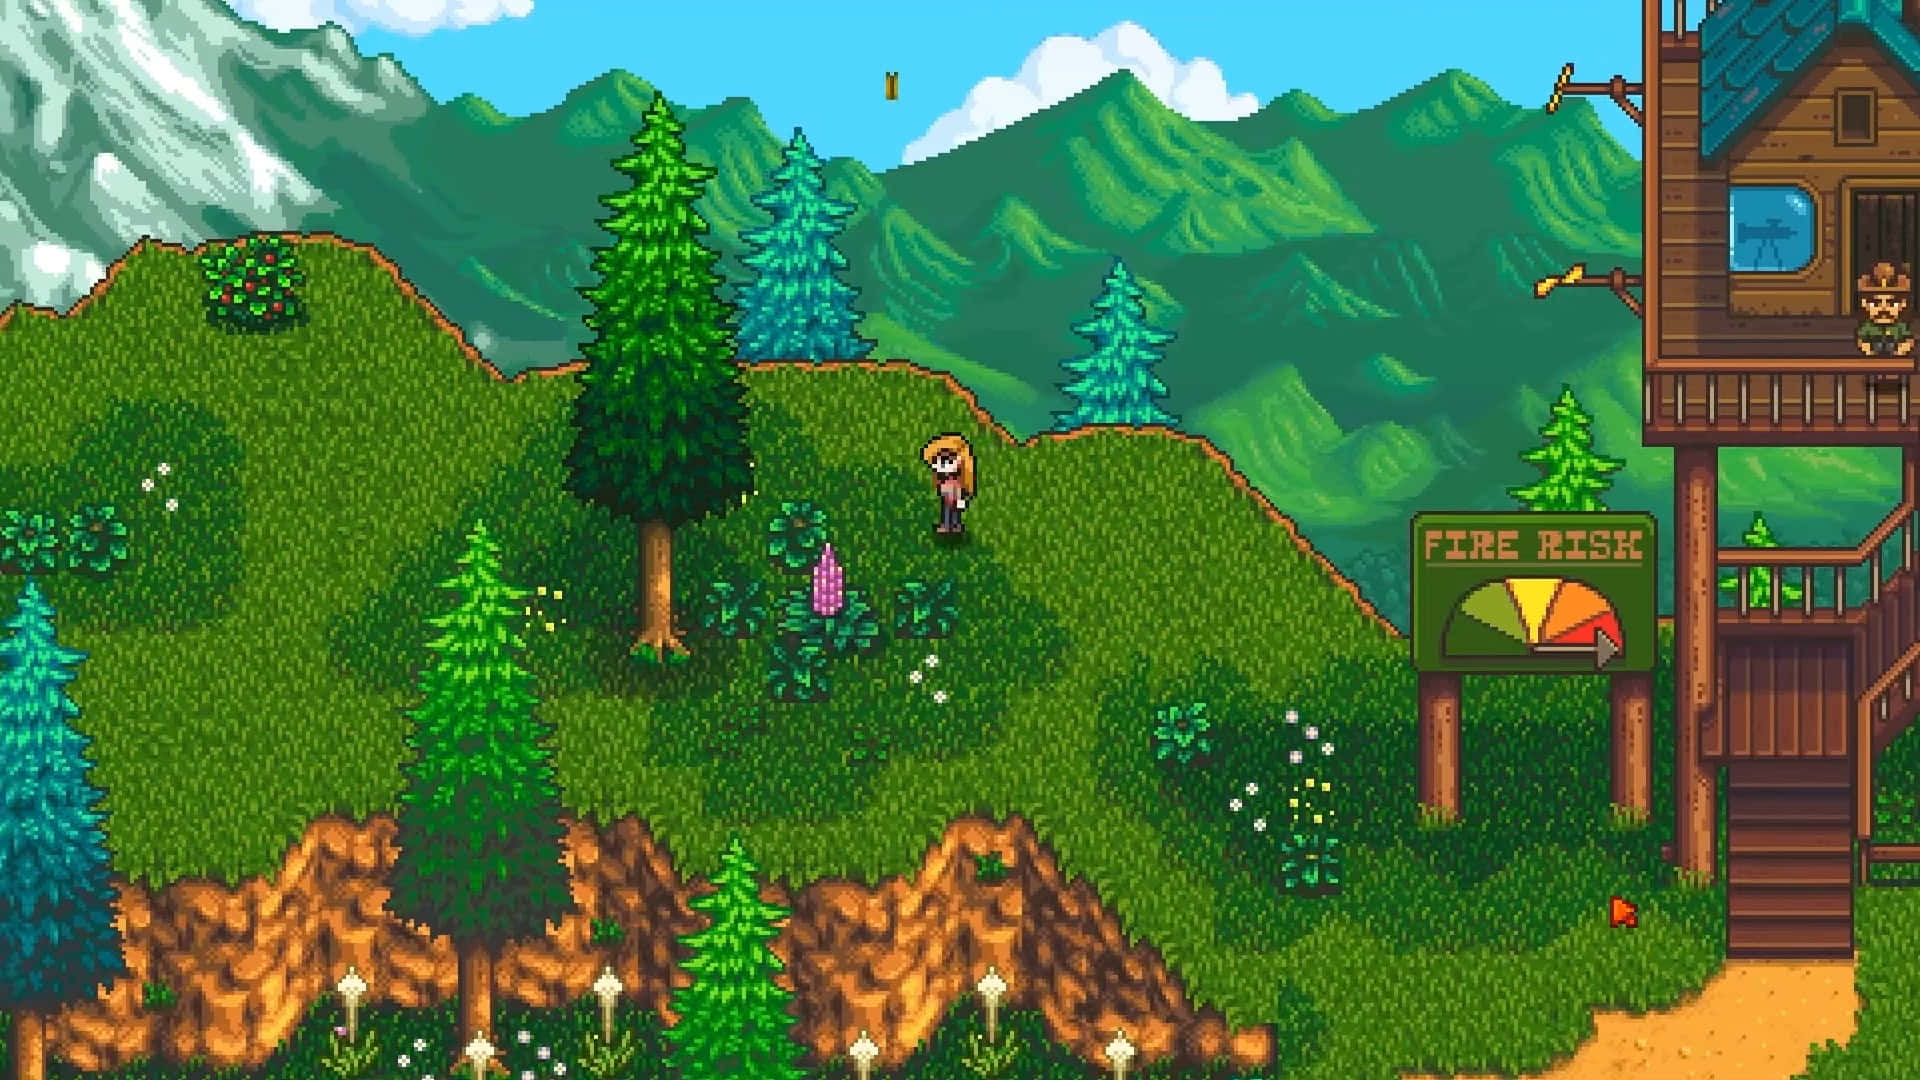 Stardew Valley wallpaper ① Download free stunning HD wallpapers for desktop  mobile laptop in any resolution   Stardew valley Wallpaper Wallpaper  backgrounds